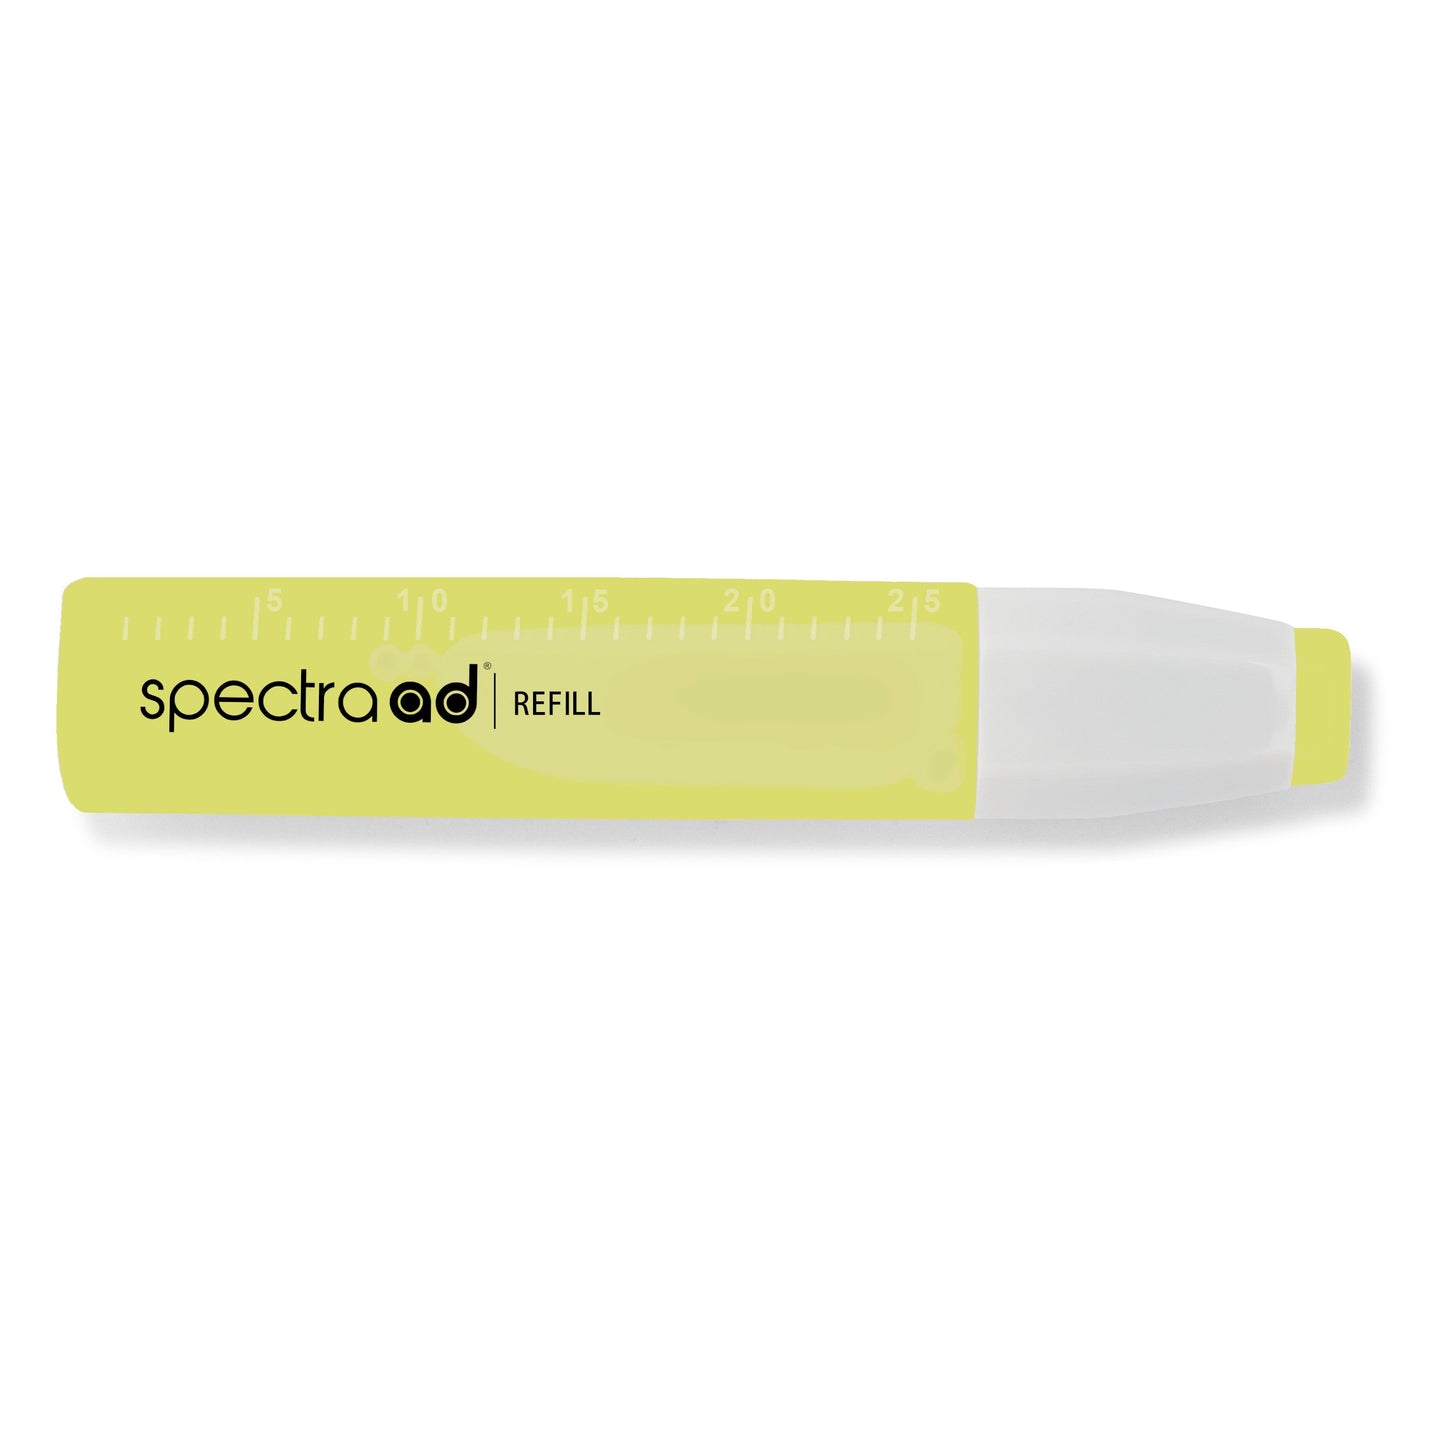 042 - Chartreuse - Spectra AD Refill Bottle